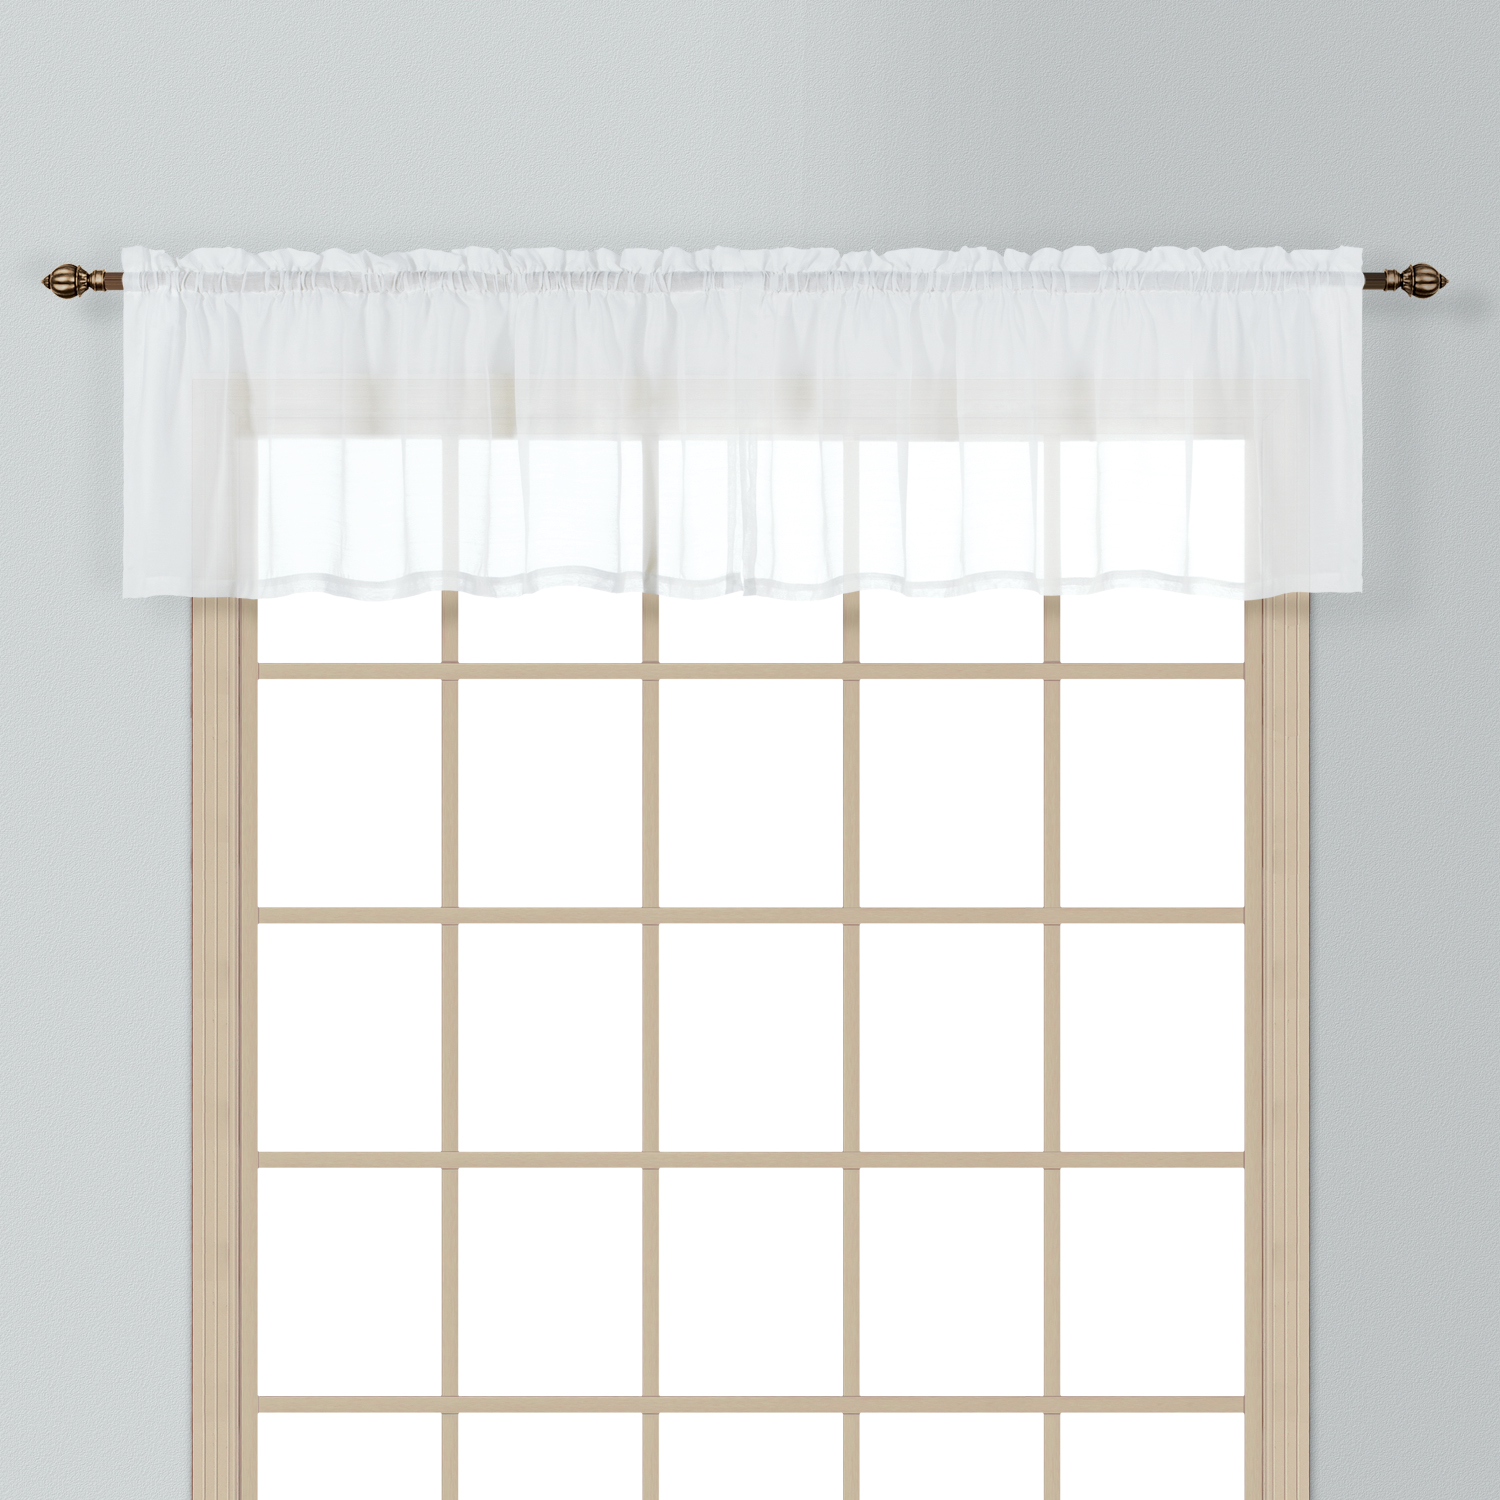 United Curtain Company Batiste 54" x 16" soft and sheer straight valance